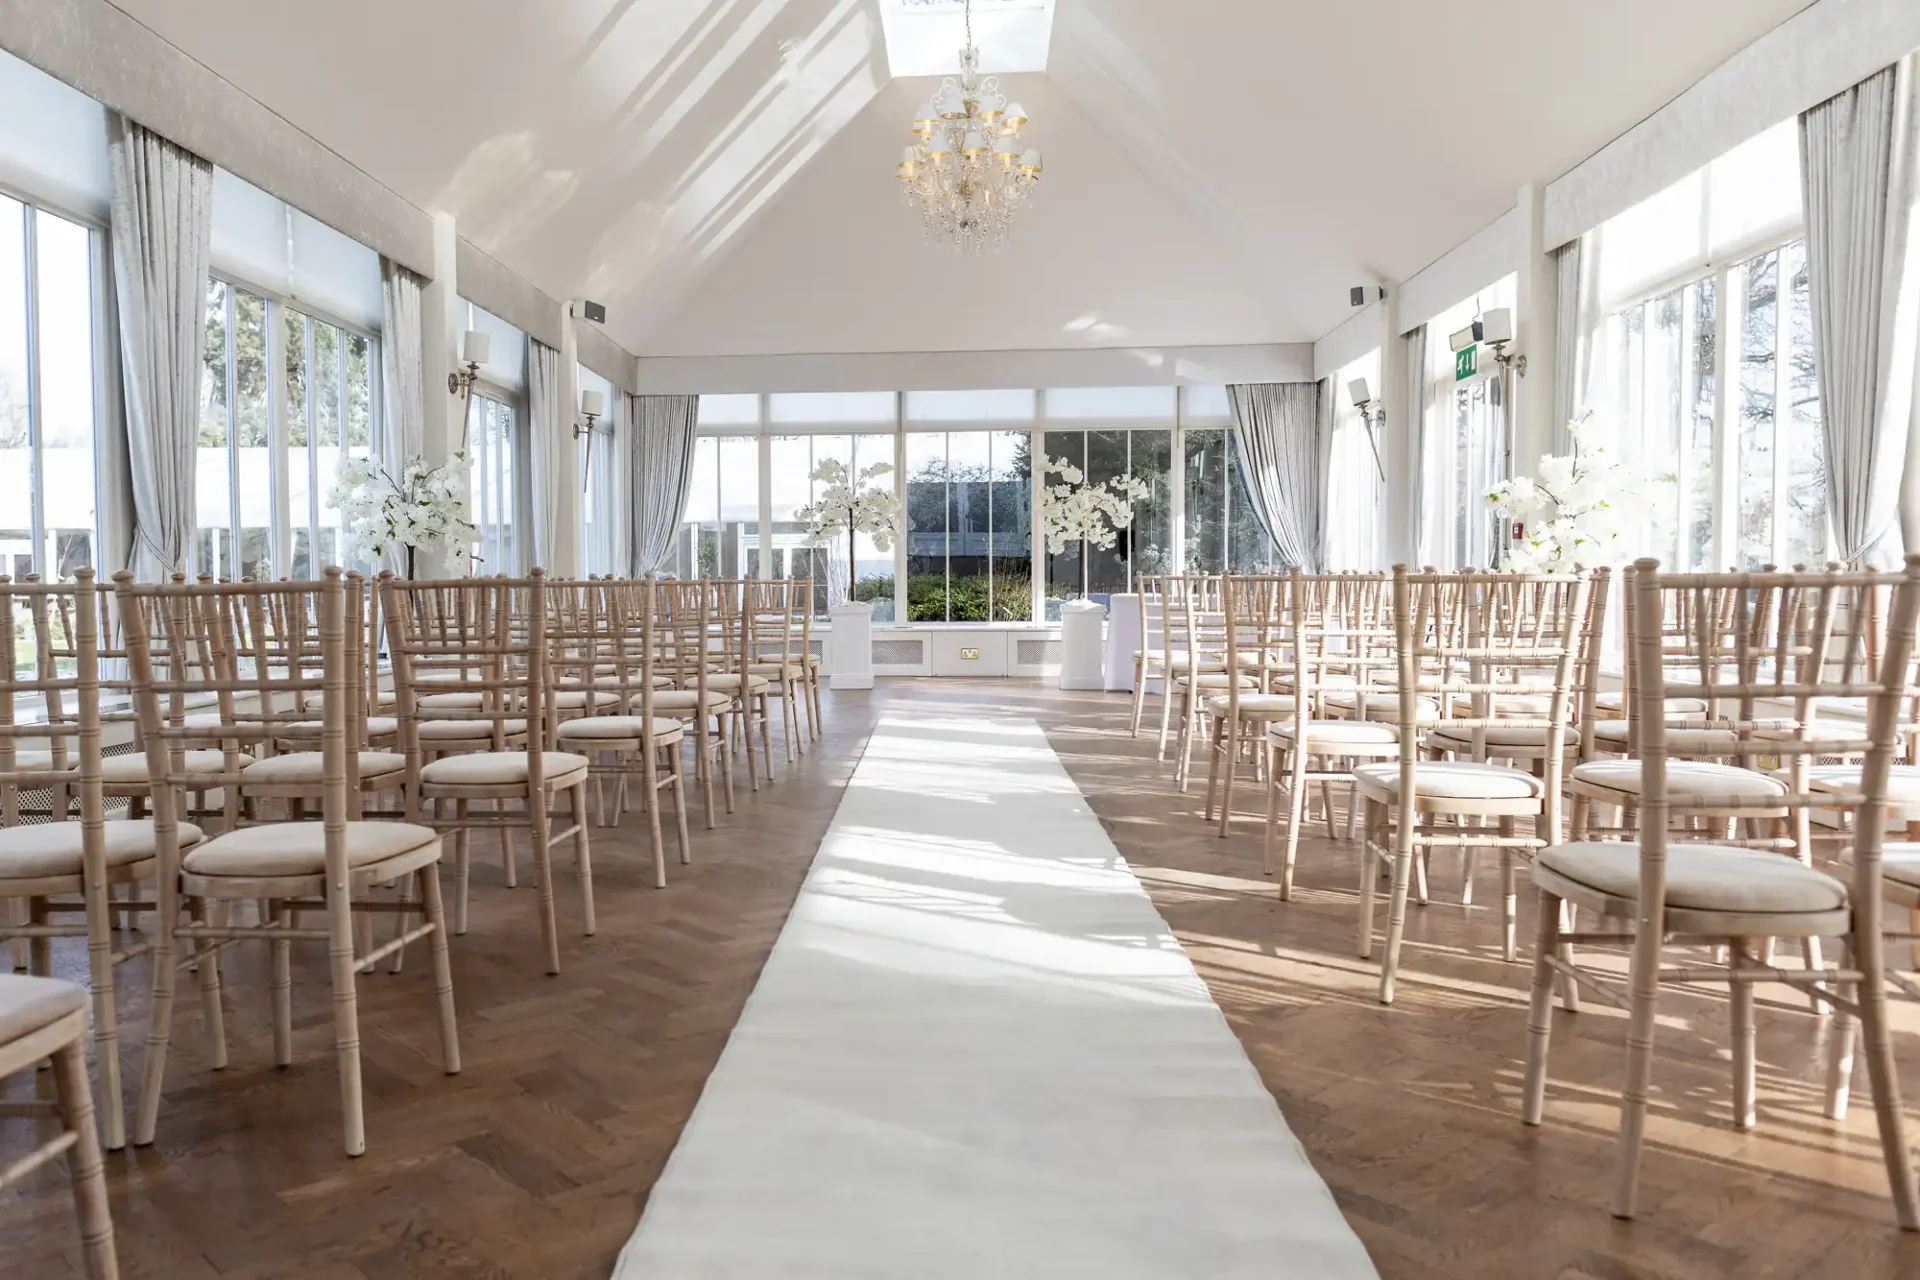 An elegant wedding ceremony room with rows of wooden chairs, a white aisle runner, and floral decorations under a chandelier, surrounded by large windows.